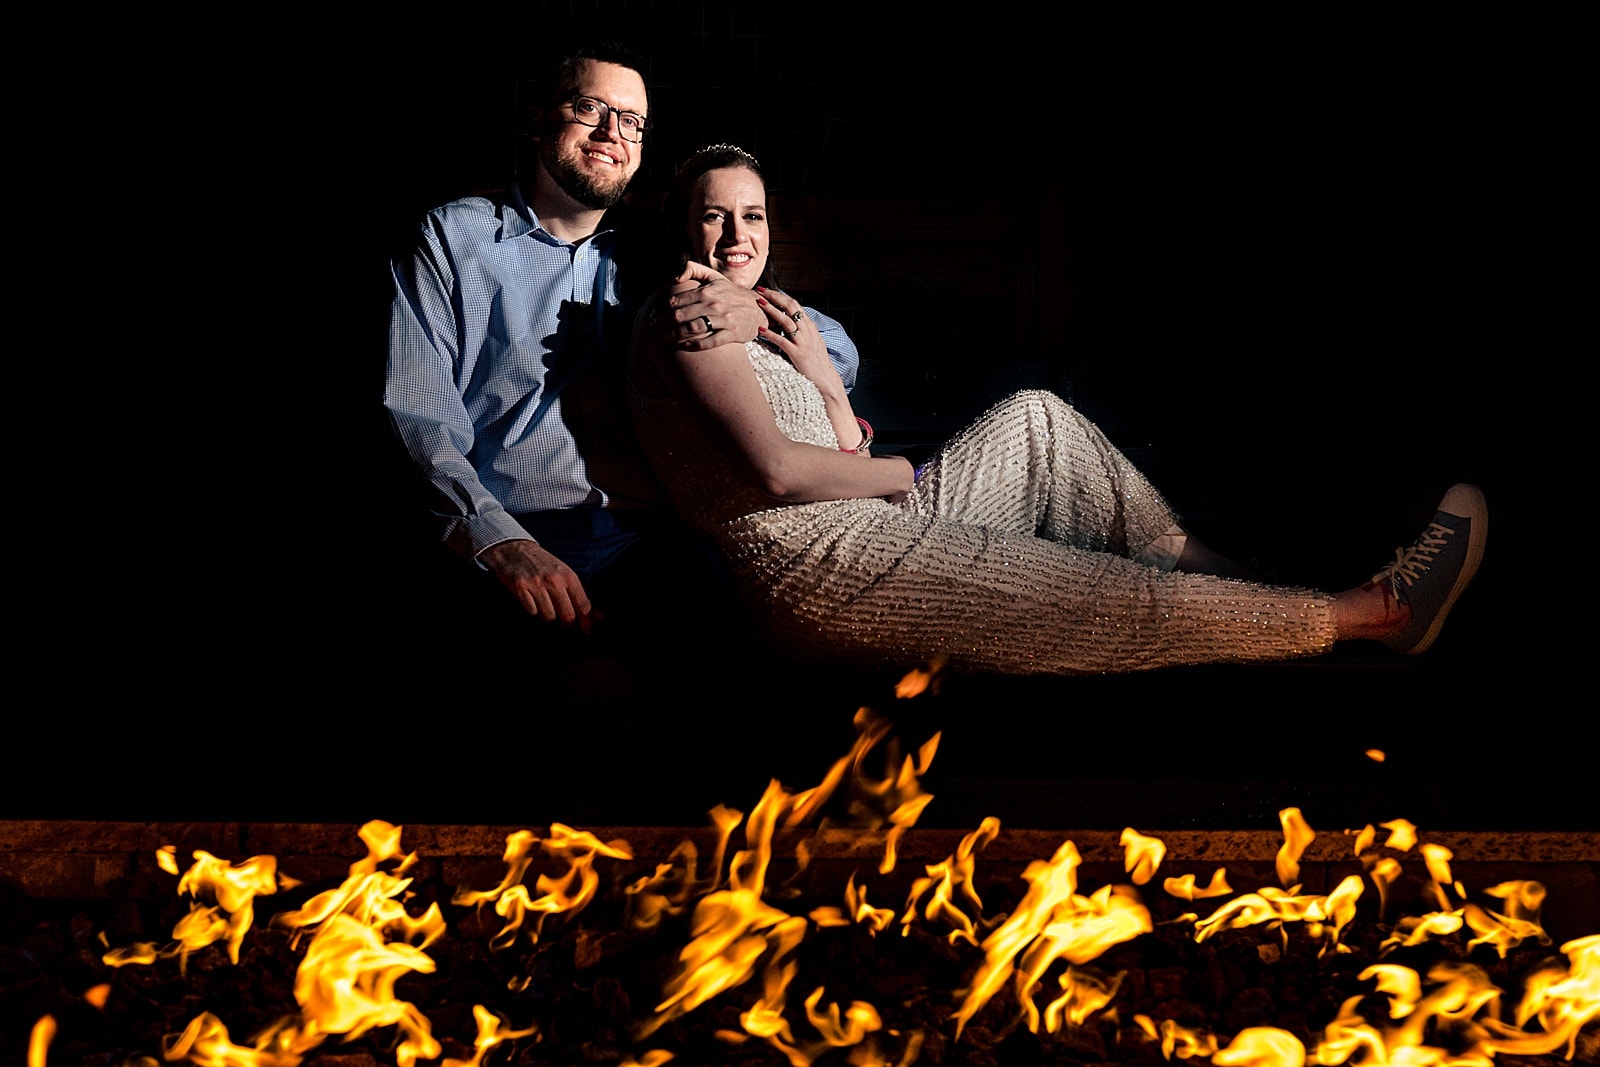 Bride, in a sparkly white jumpsuit, and groom enjoy a break from their wedding reception with a bonfire | NC wedding photographers Kivus & Camera